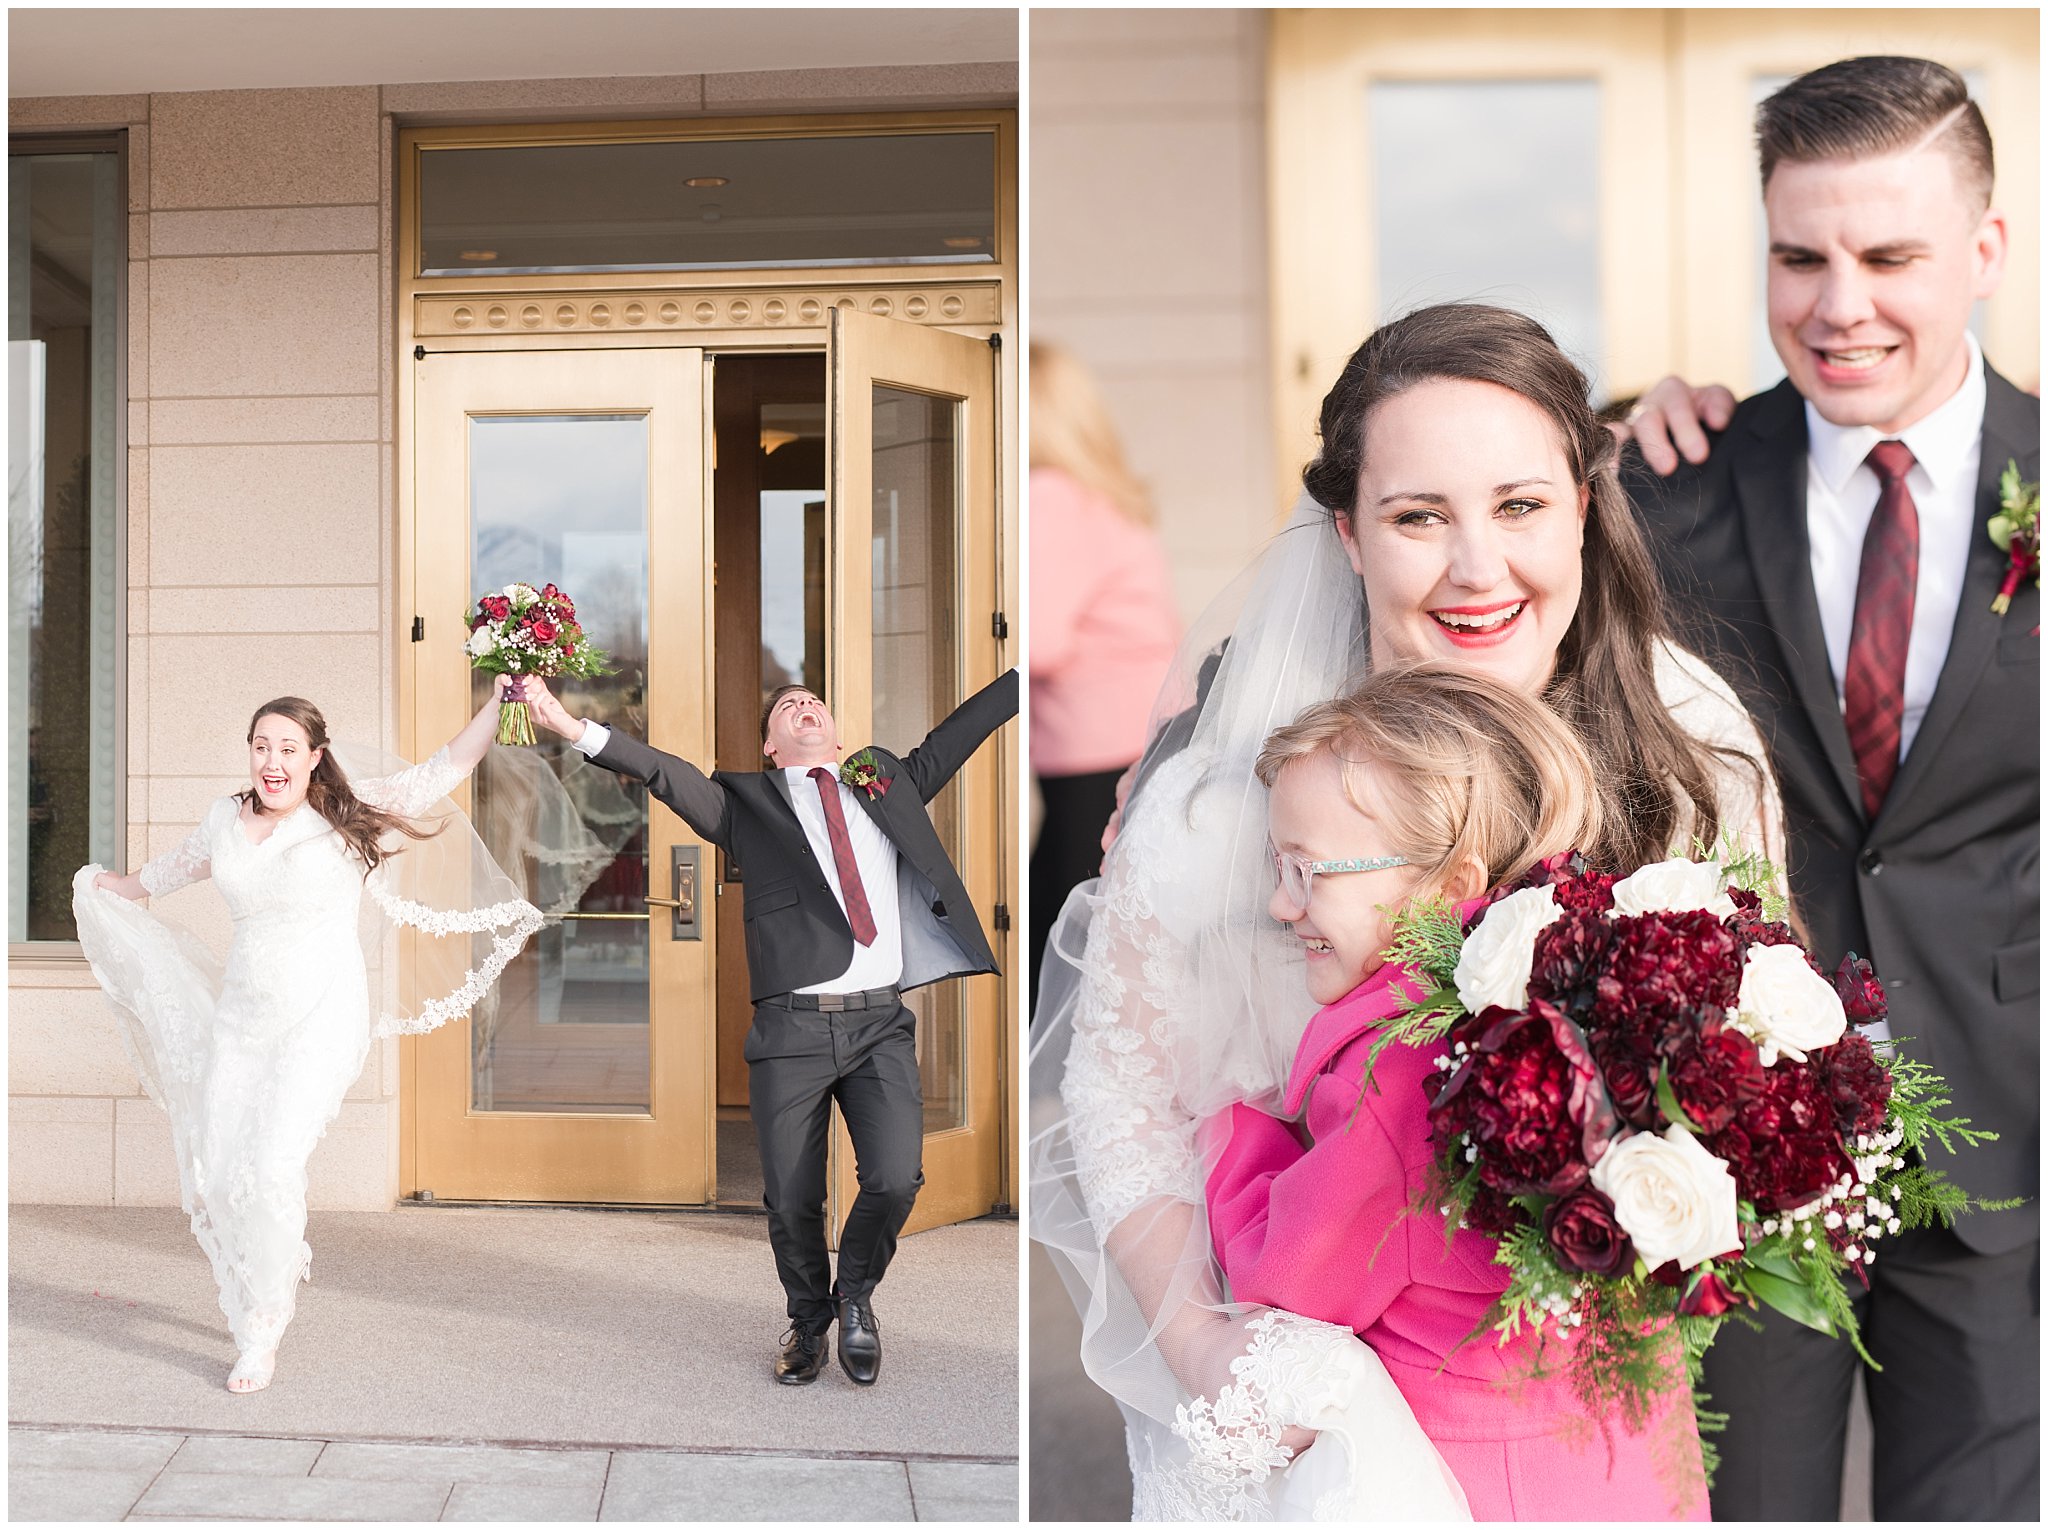 Bride and groom exit the Oquirrh Mountain Temple | Oquirrh Mountain Temple and Gardner Village Wedding | The Gathering Place | Jessie and Dallin Photography